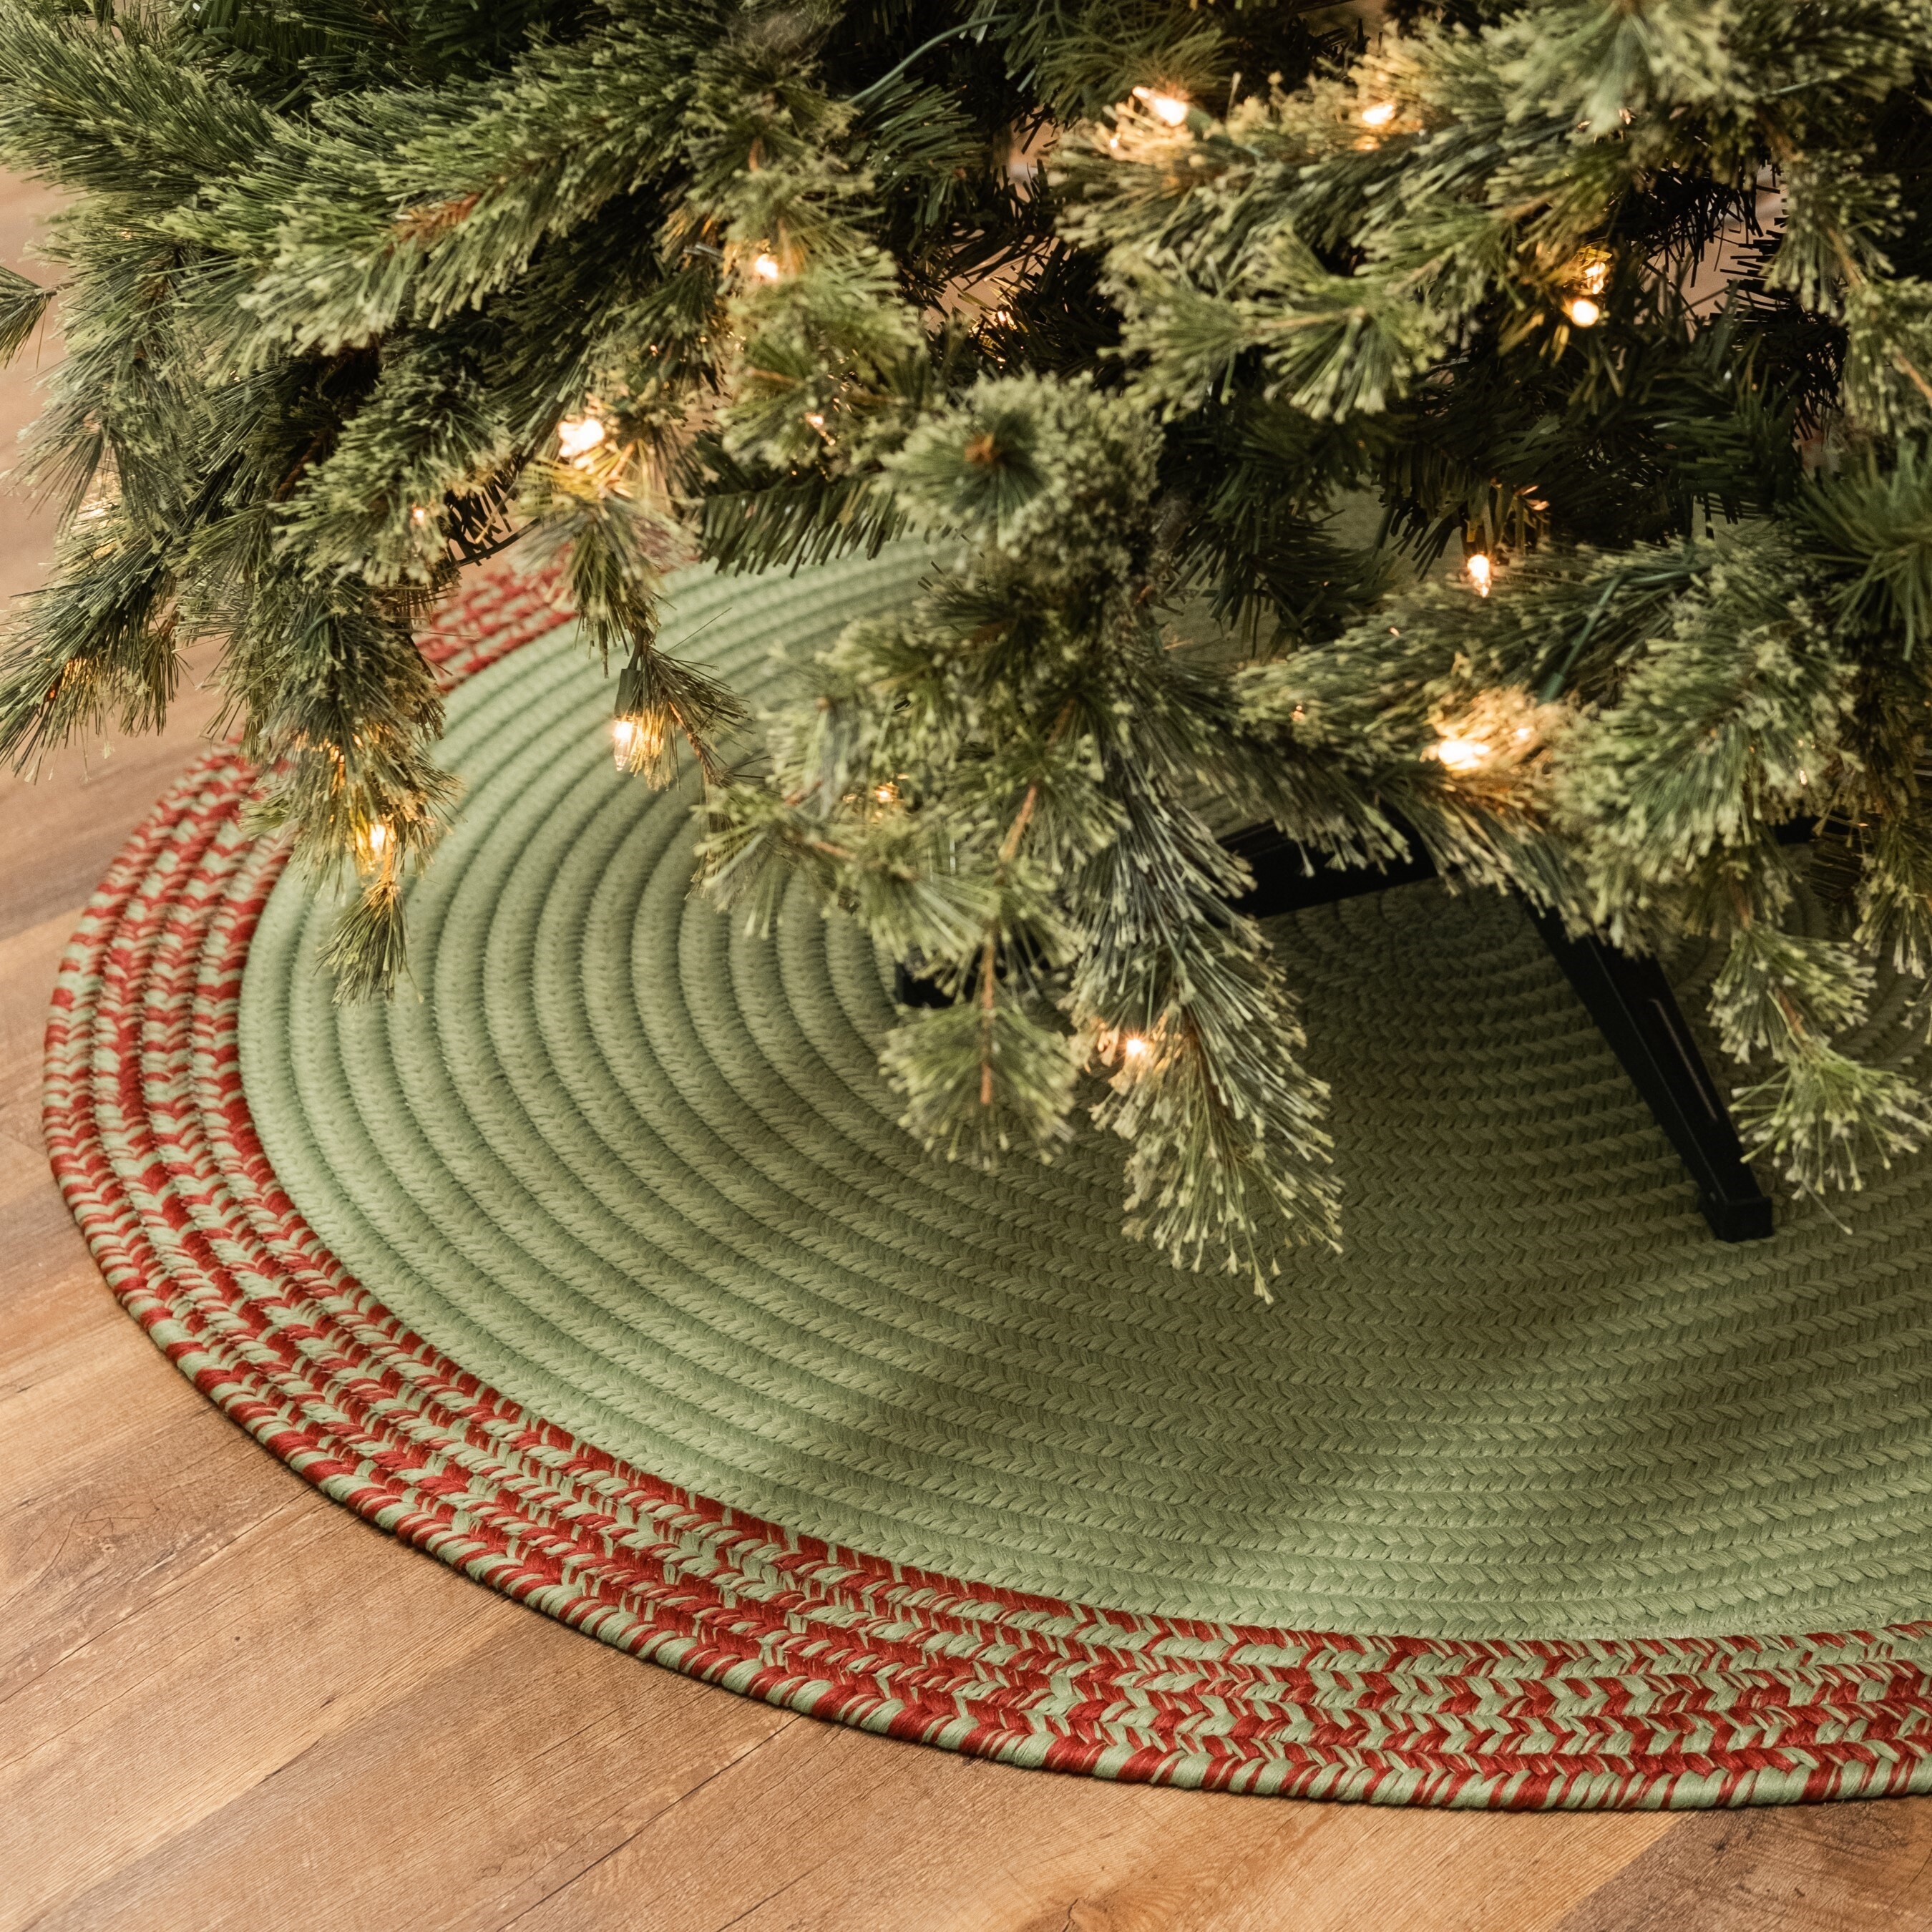 Round Christmas Rugs - Bed Bath & Beyond